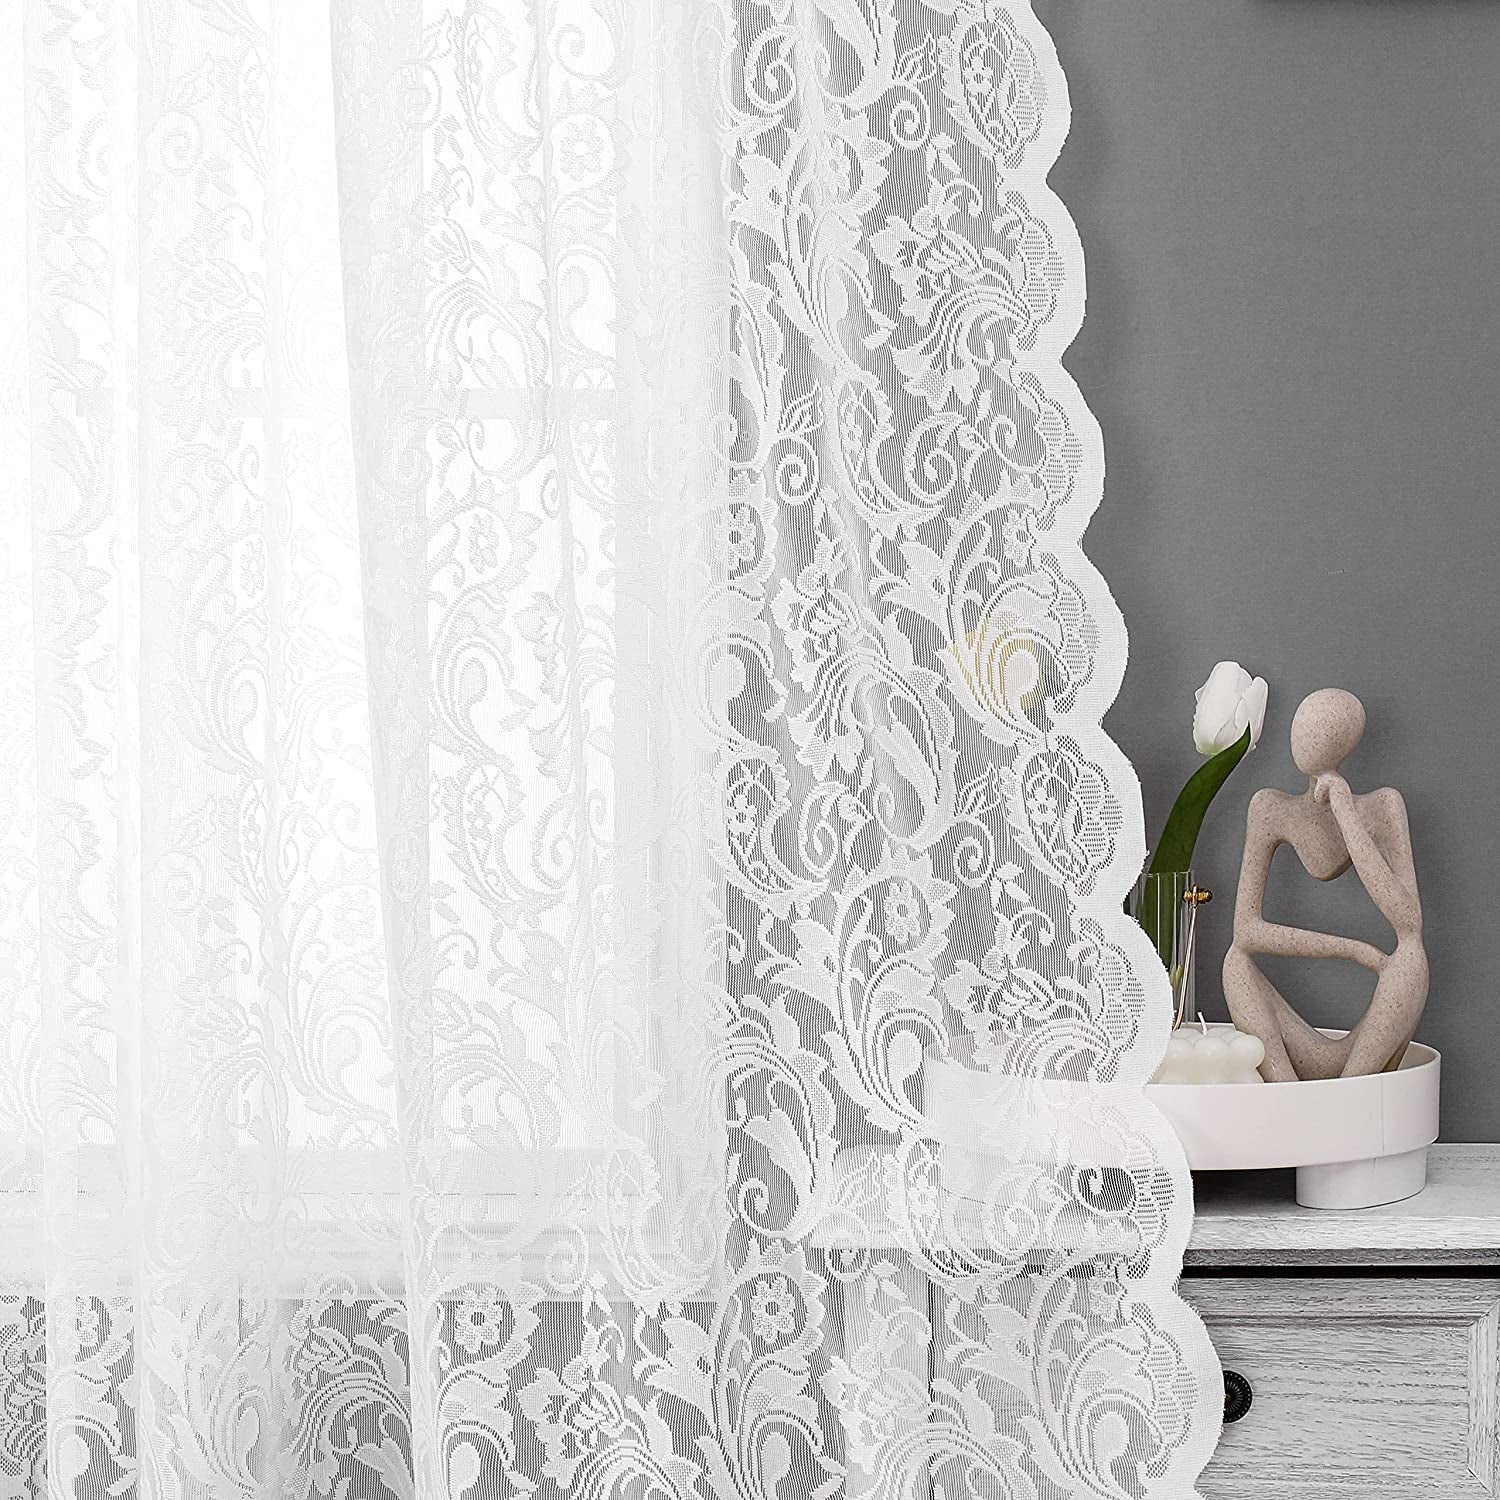 Black Sheer Lace Curtains 84 Inch Vintage Floral Sheer Gothic Curtain Panels for Living Room Bedroom Luxury Light Filtering Drapes Black Window Treatment Sets Rod Pocket 2 Panels 54" Wx84 L  Bujasso Rod Pocket White 54"X108"X2 